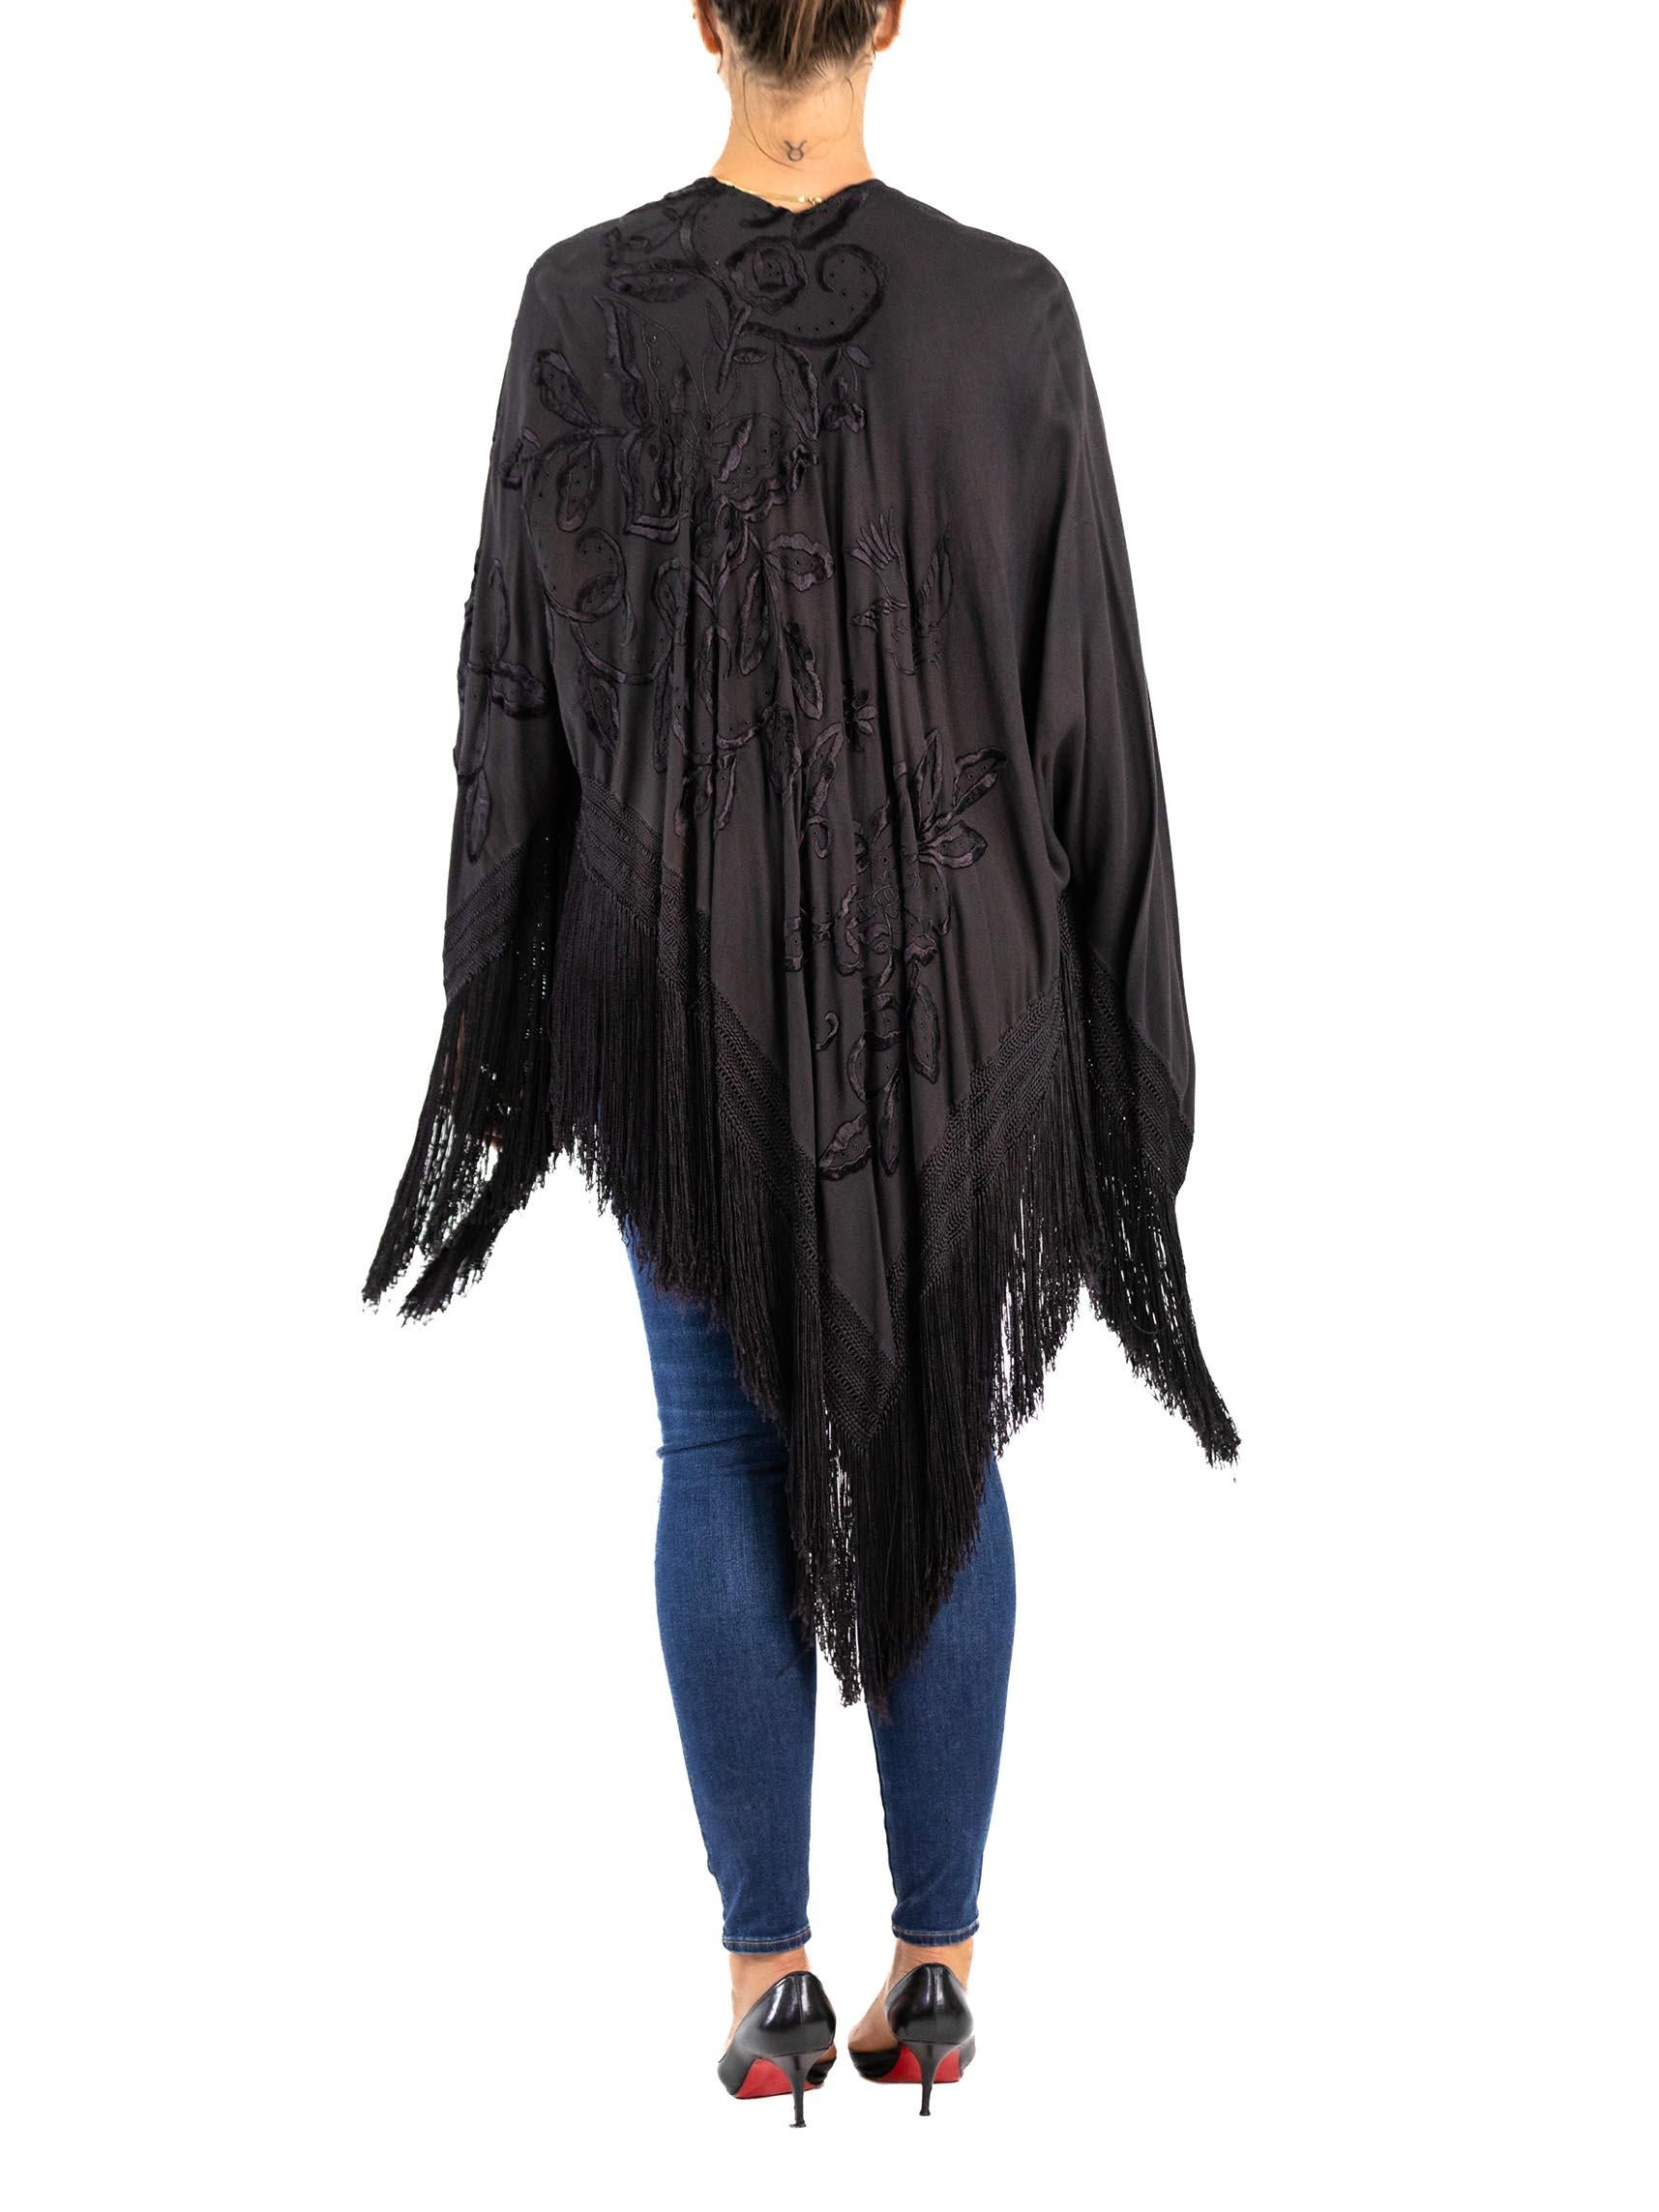 1920S Black Hand Embroidered Wool Blend Piano Shawl Style Jacket With Fringe For Sale 5